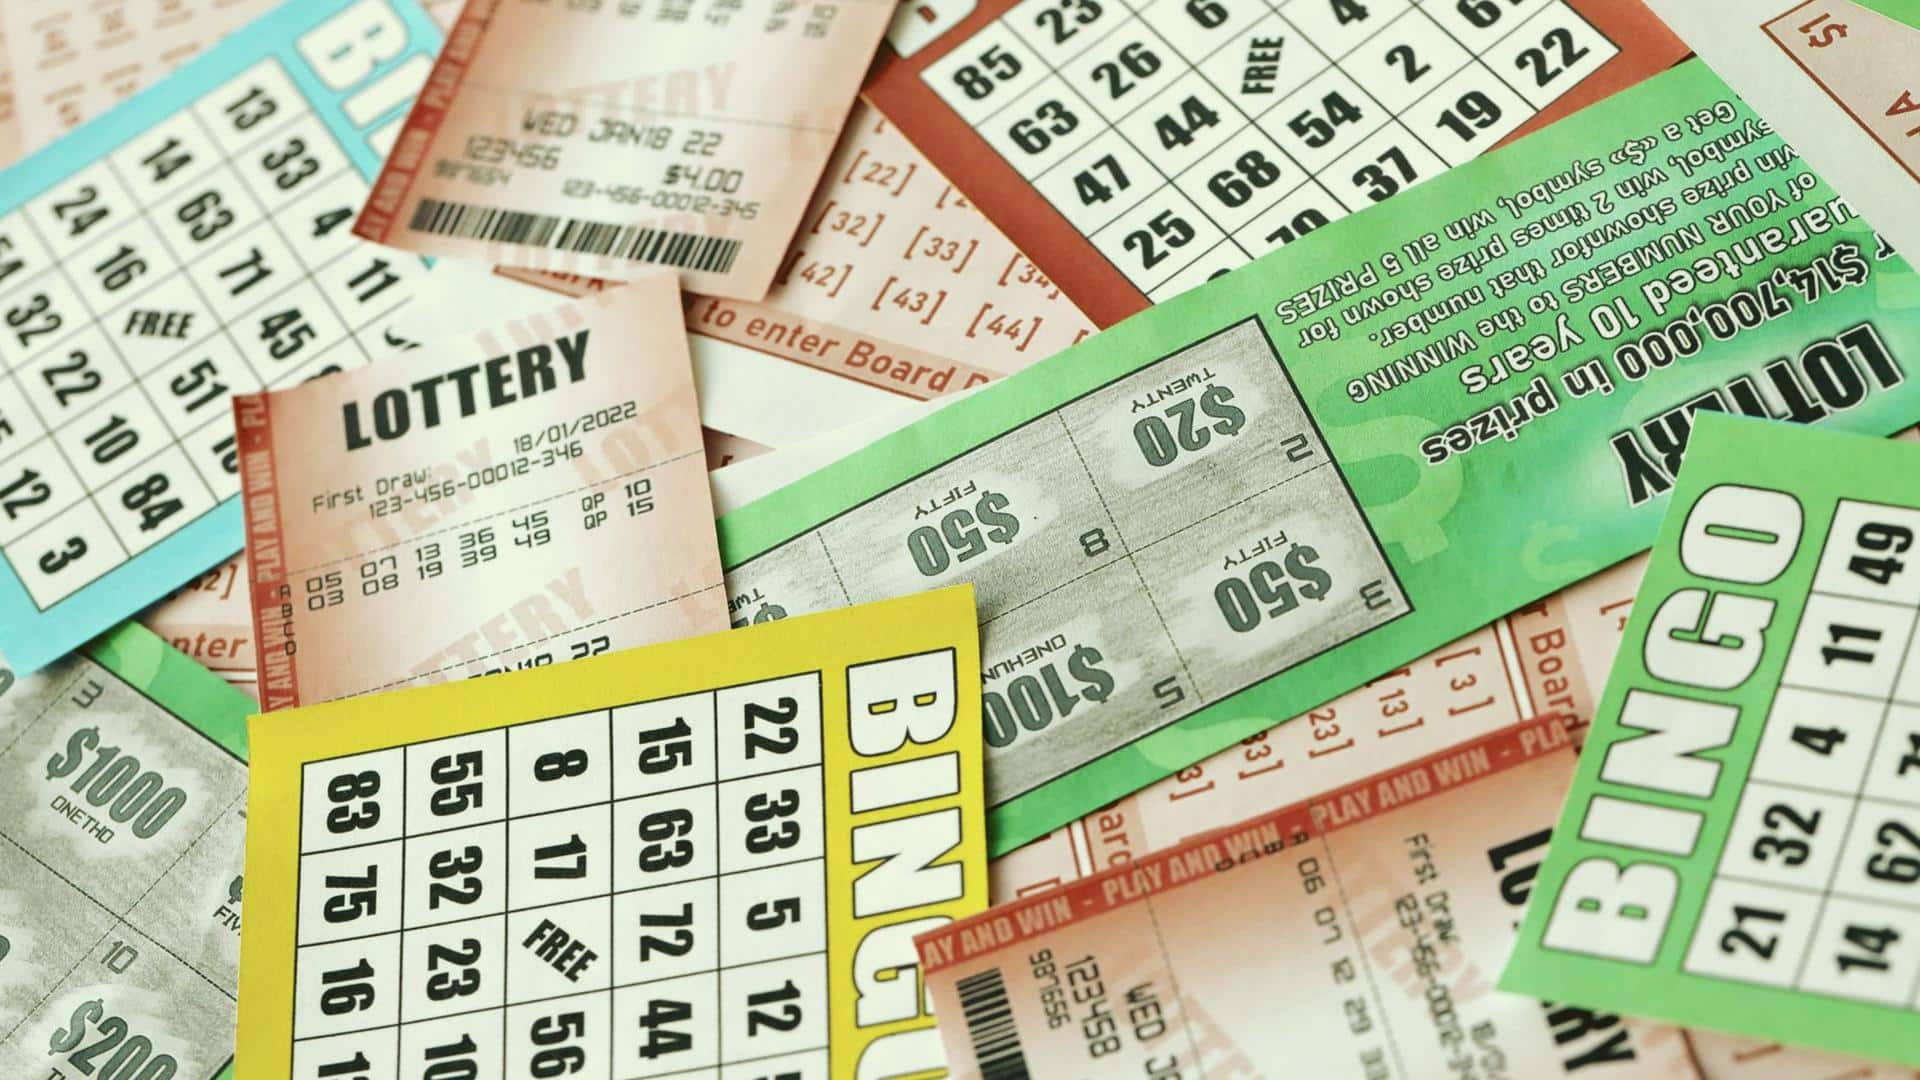 Man played with same lottery numbers; wins after a decade